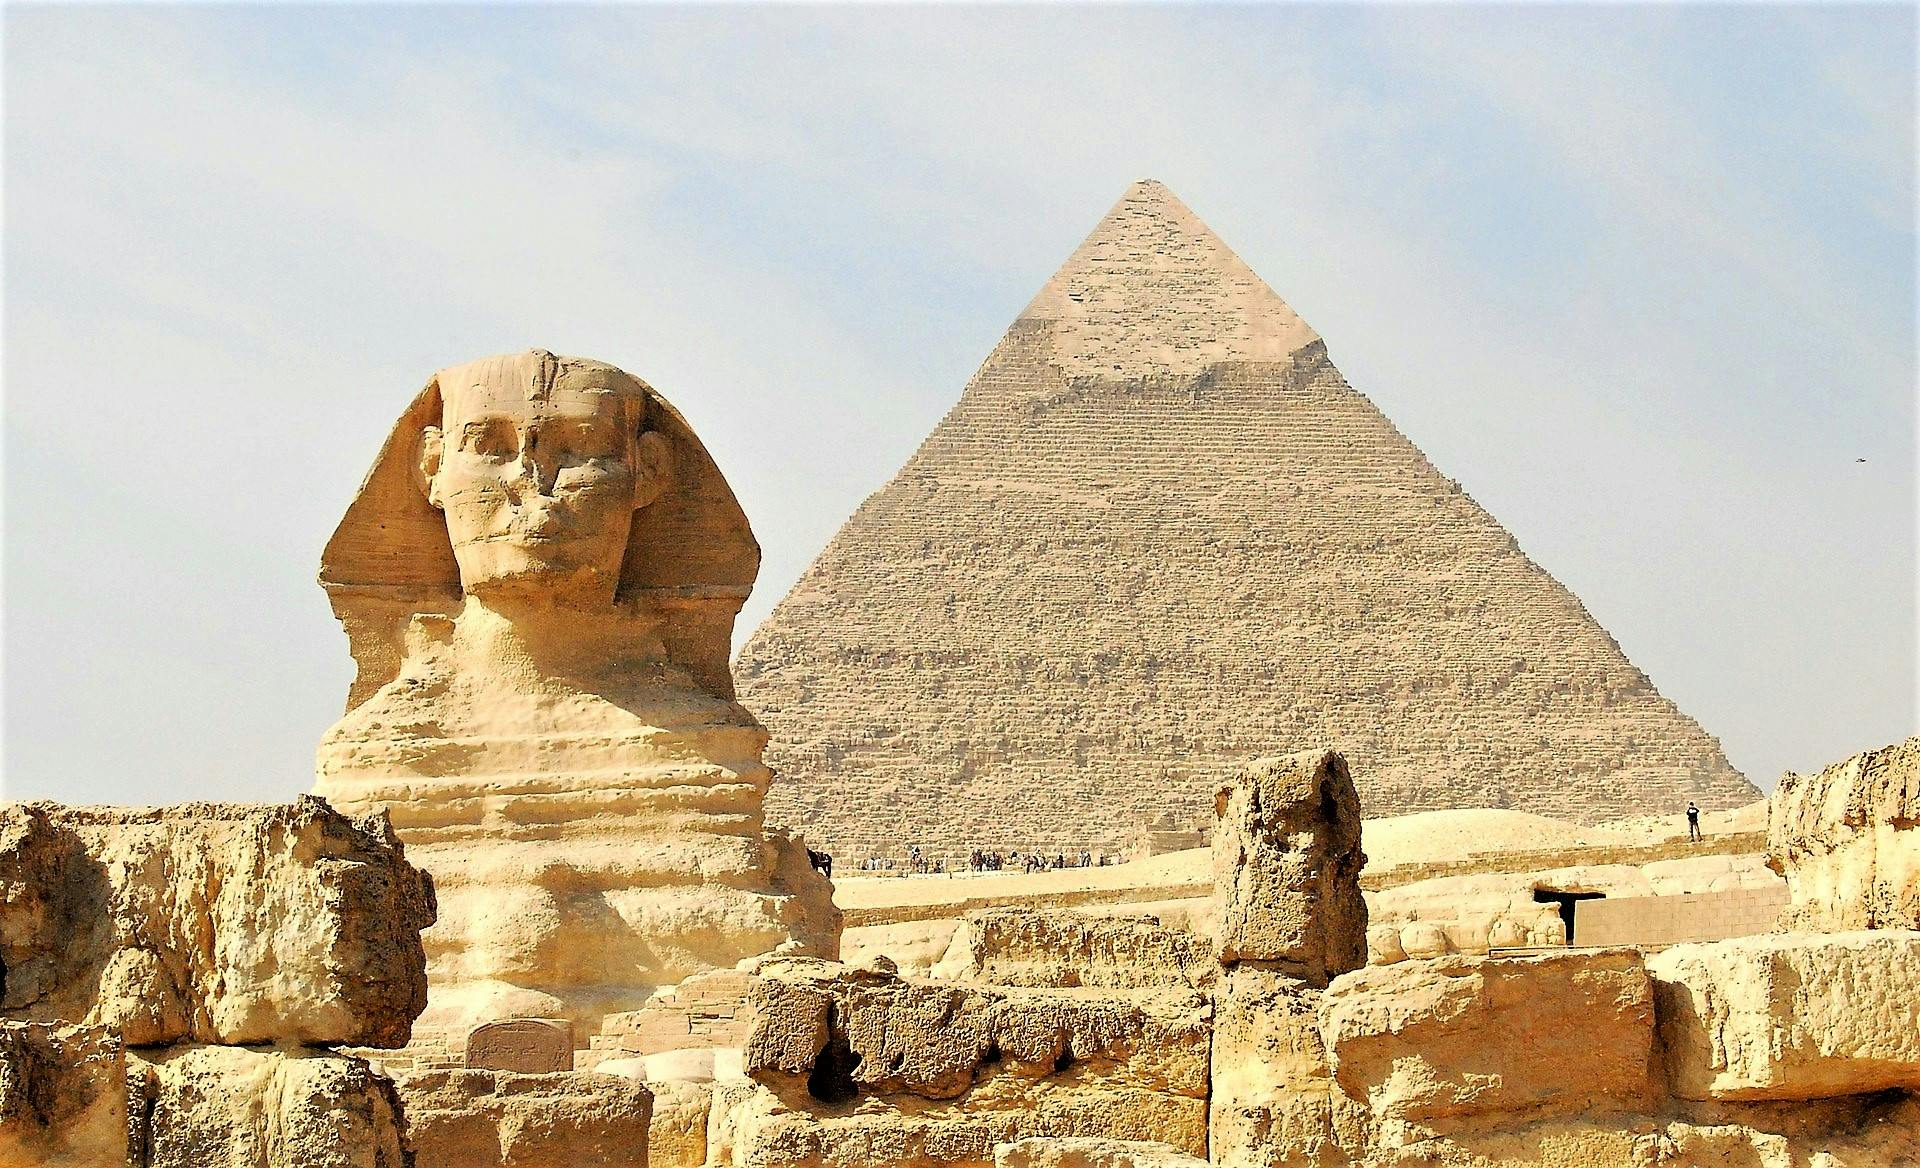 Giza Pyramids Sphinx and Egyptian Museum tour from Sharm El Sheikh Musement